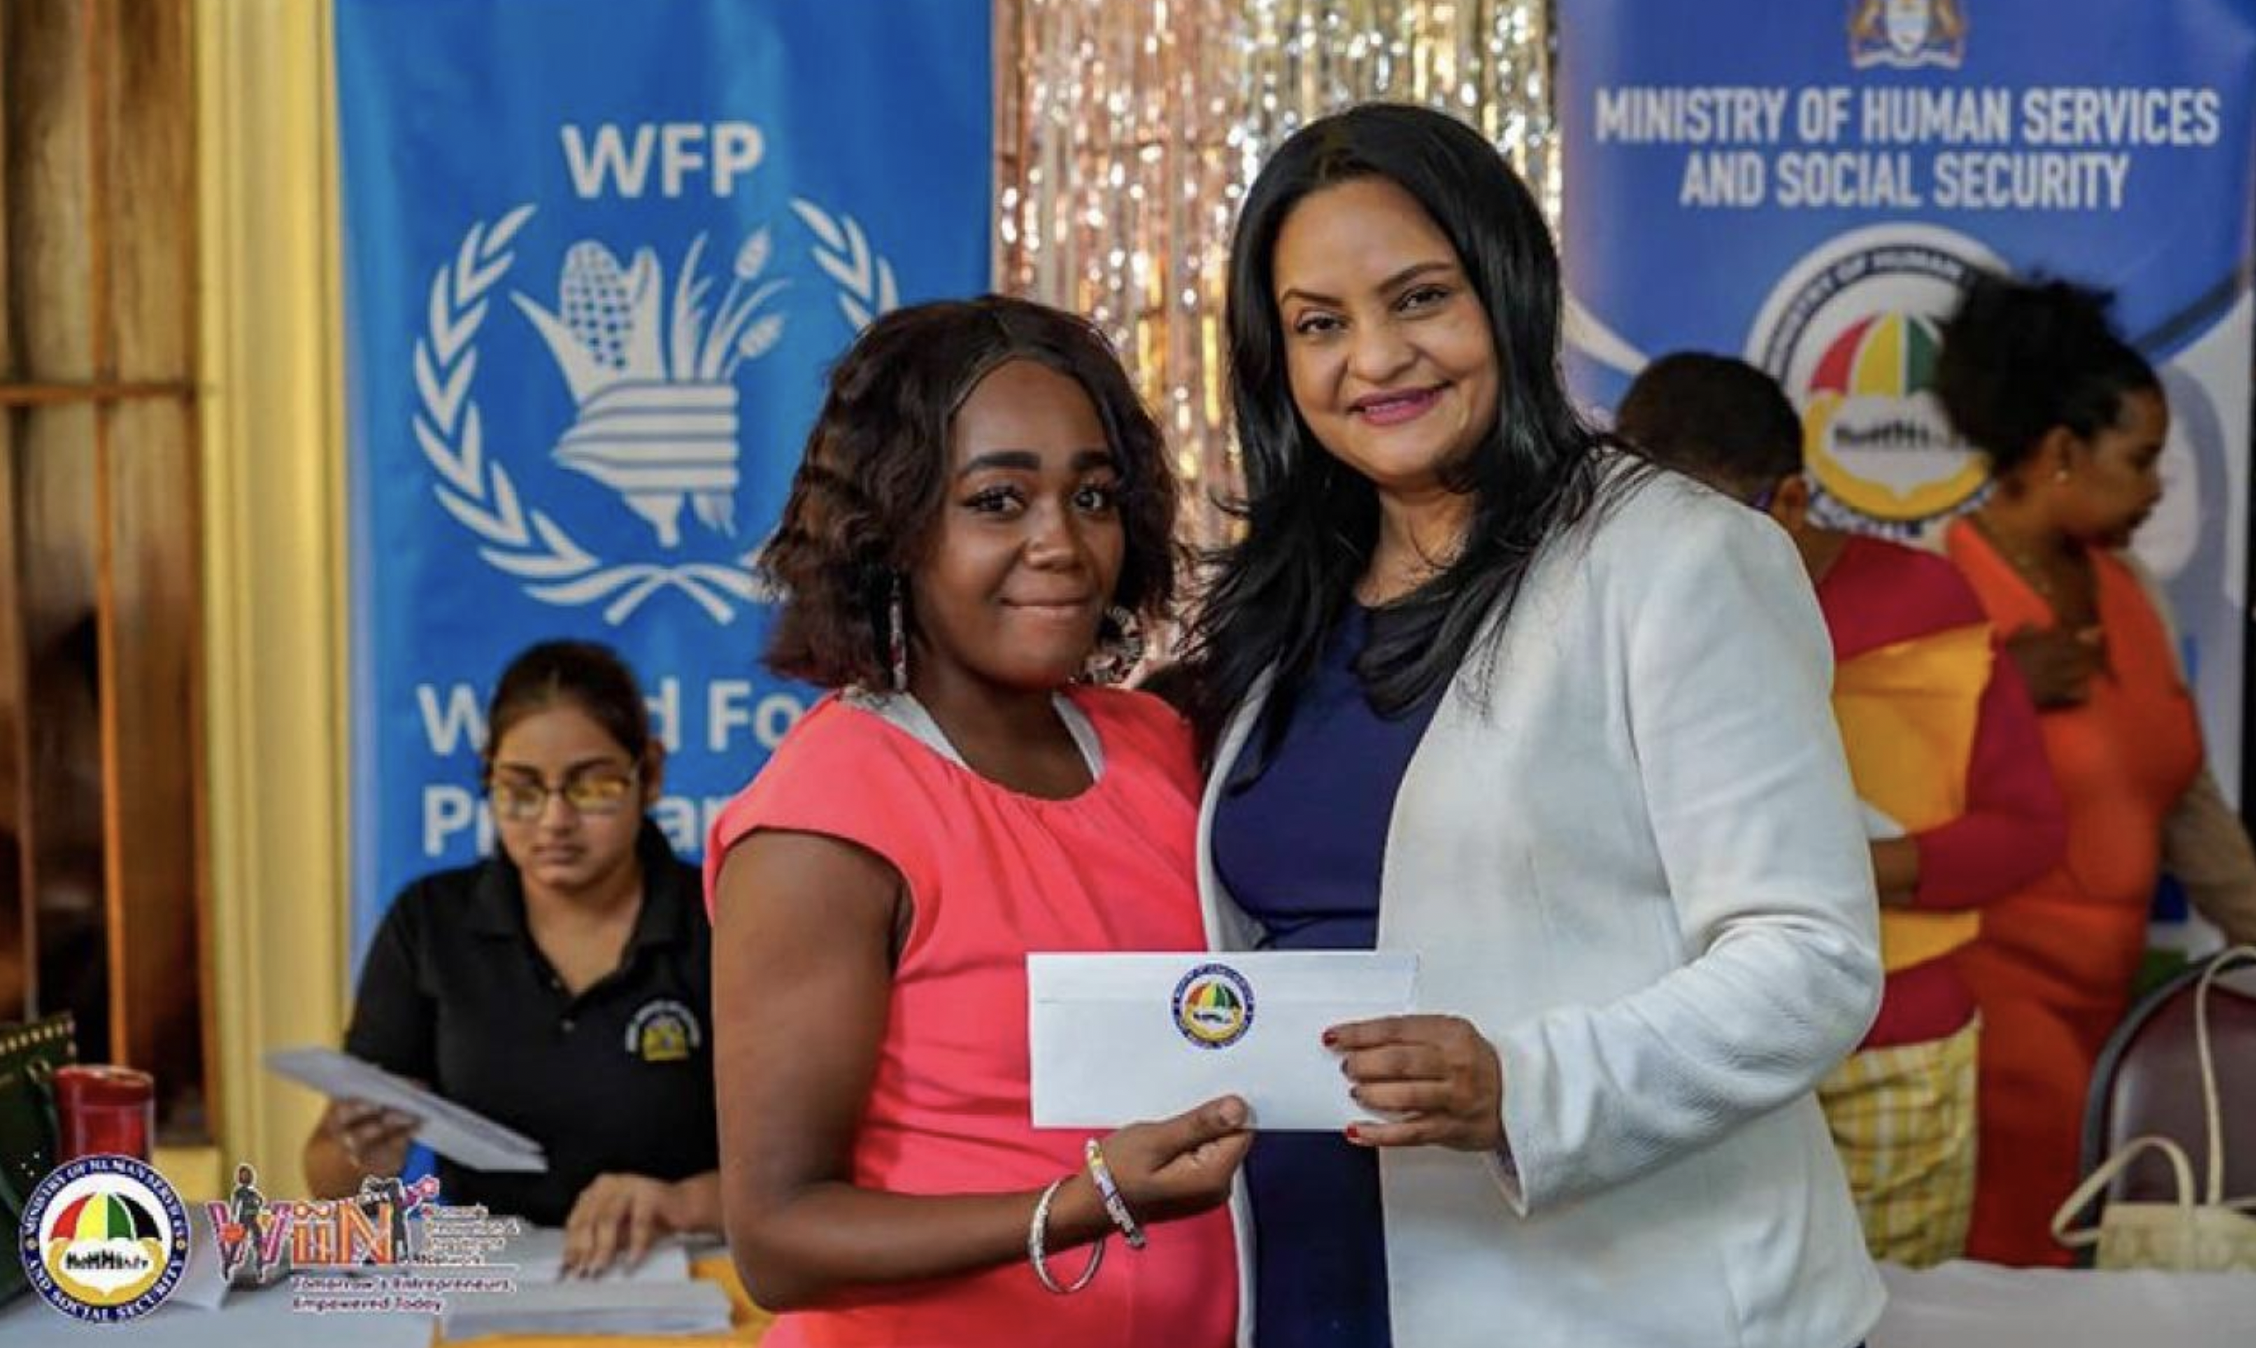 aption: Dr. Vindhya Persaud, Minister of Human Services and Social Security hands over a cash grant. | Photo: © Ministry of Human Services and Social Security